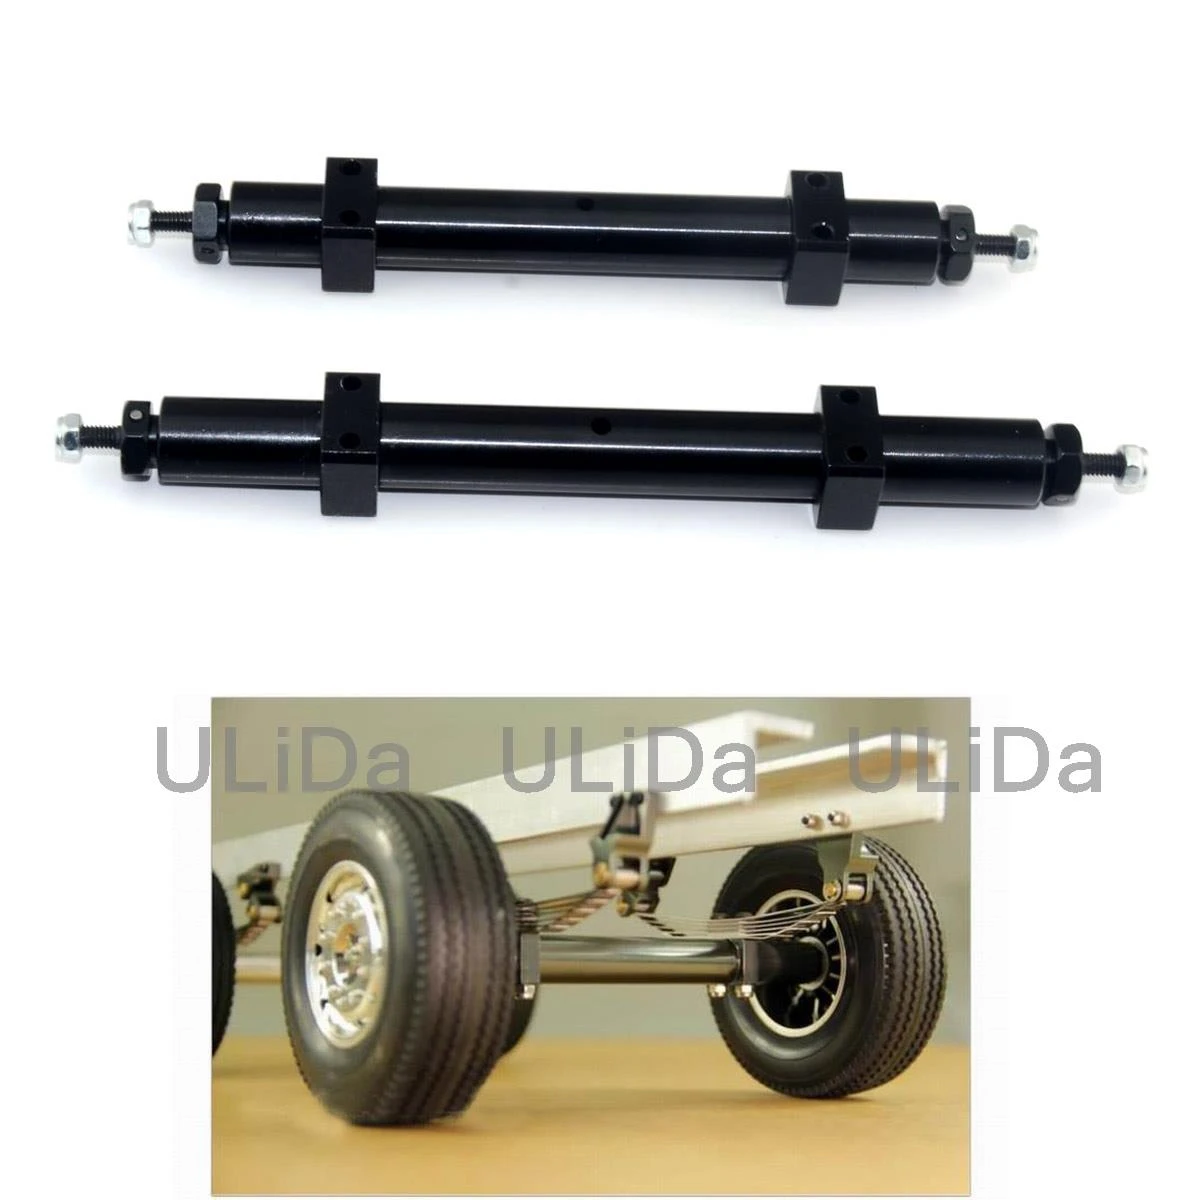 Upgrade All Metal Rear Wheel Axle 120MM 140MM for TAMIYA 1:14 RC Tractor Trailer